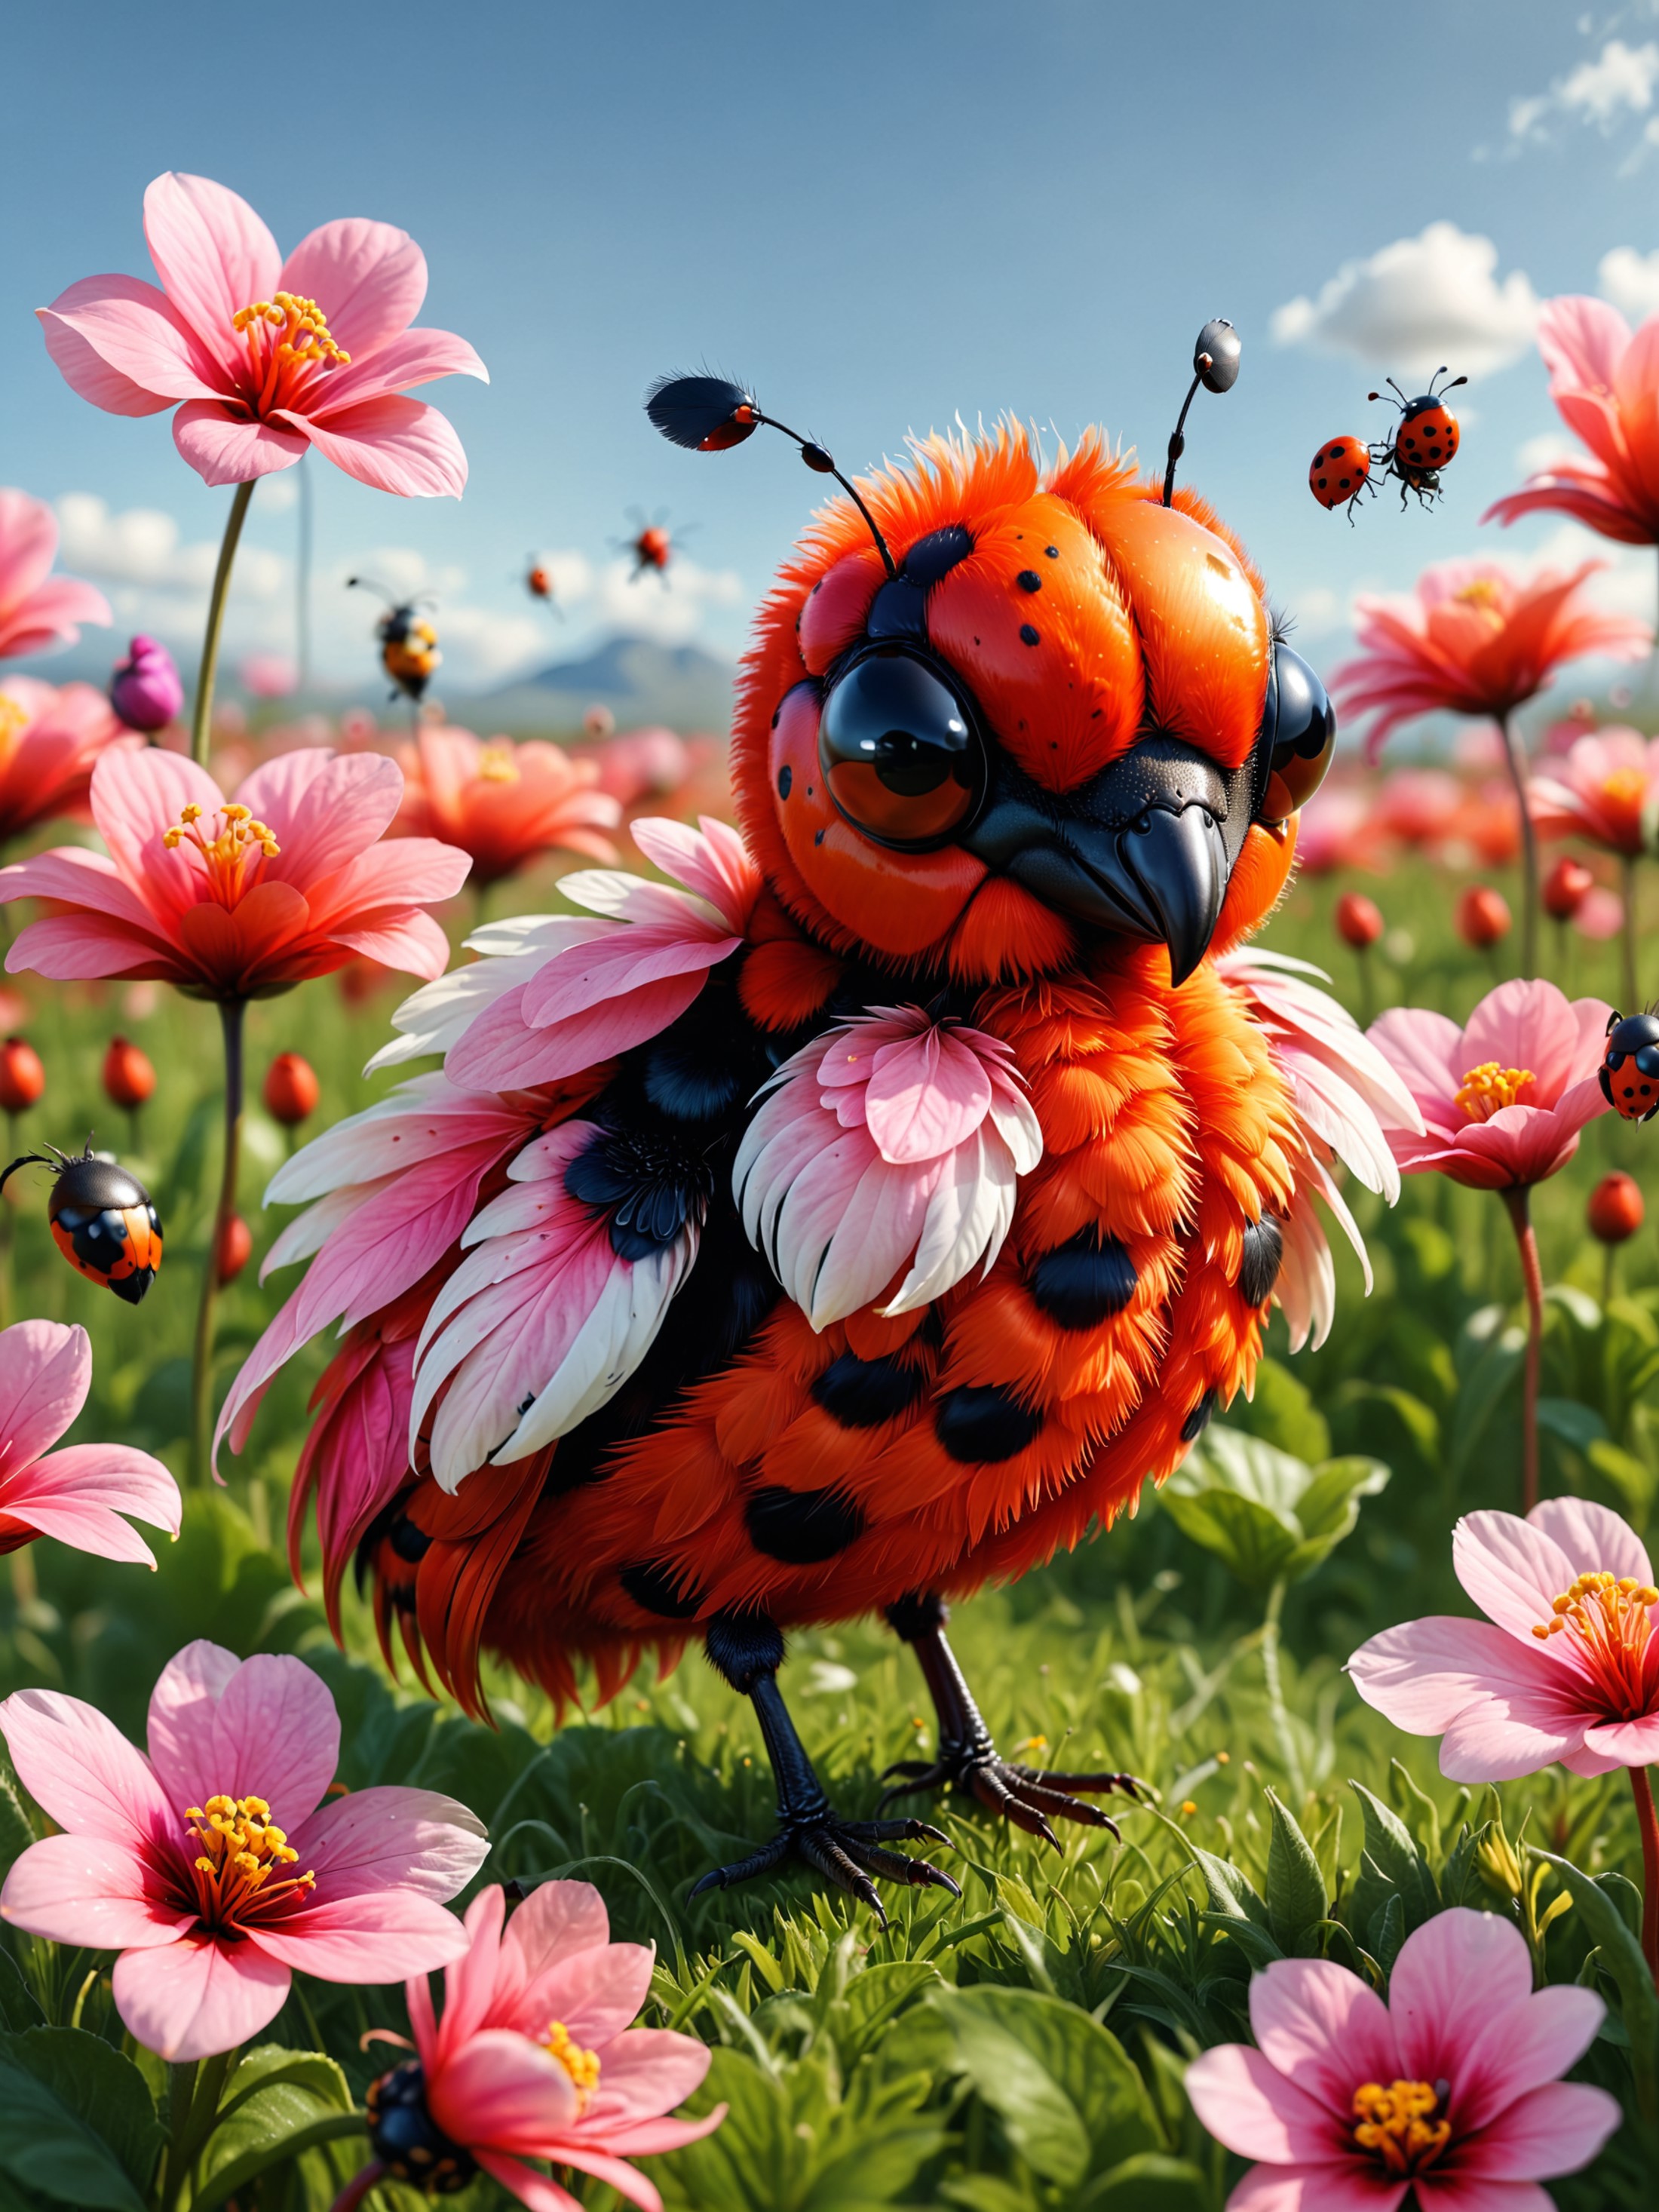 An adorable ladybug flamingo hybrid creature with  flower petal-like feathers in a field of pink and red flowers, hyperrea...